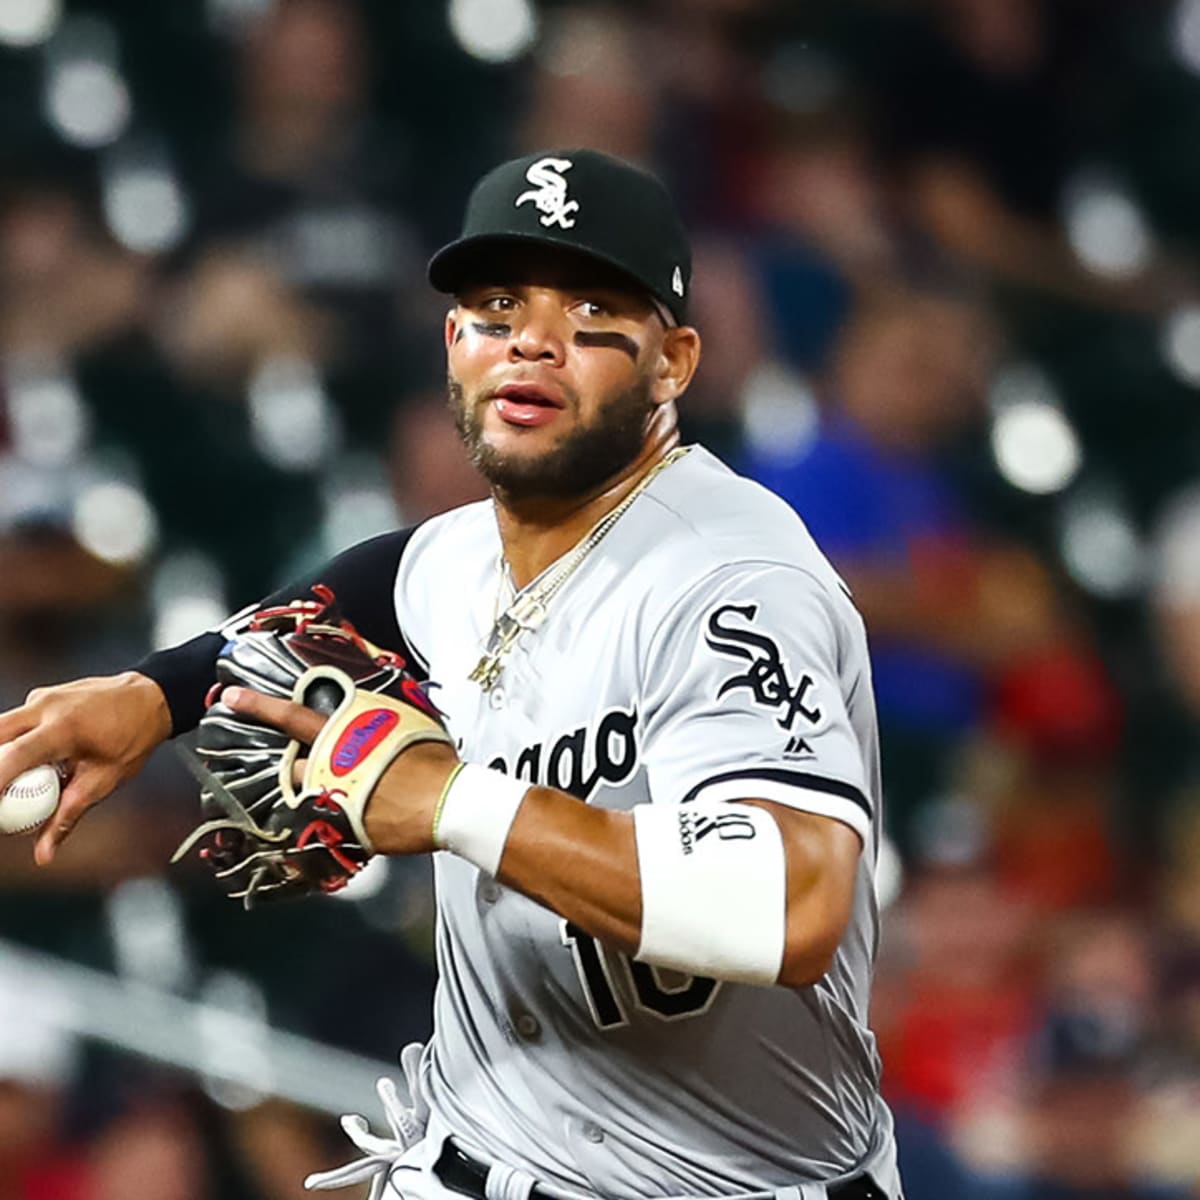 White Sox sign lefty Aaron Bummer to five-year extension - Chicago